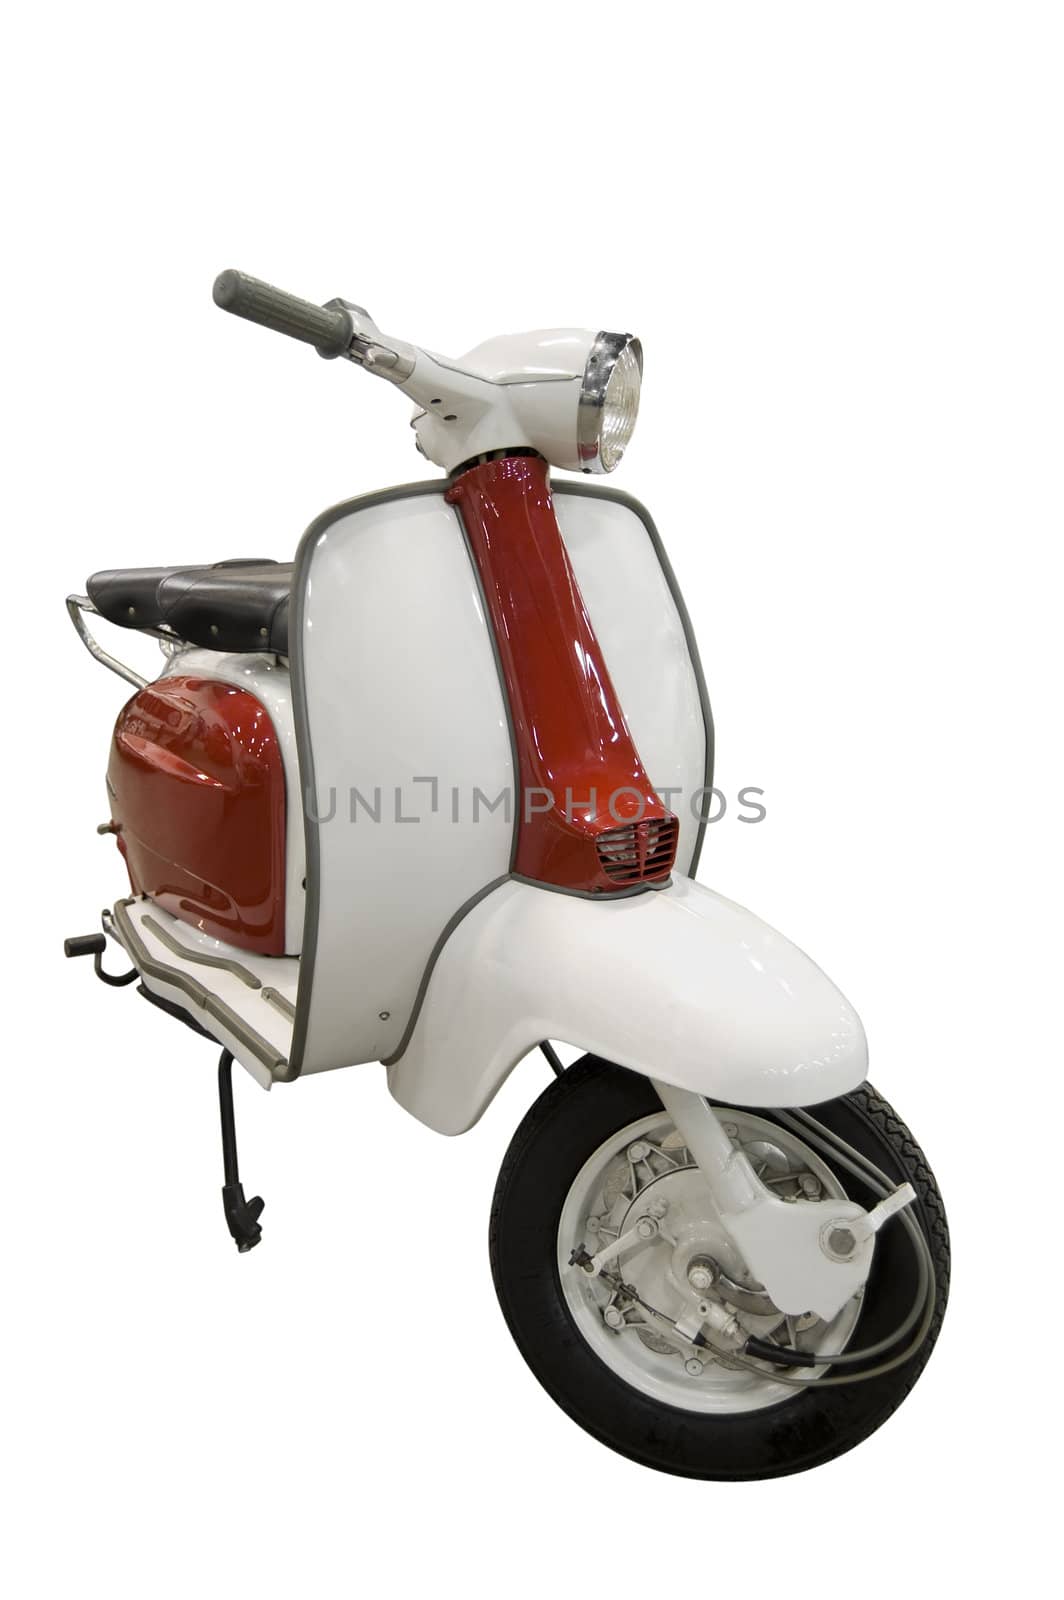 Vintage red and white scooter (path included) by simas2